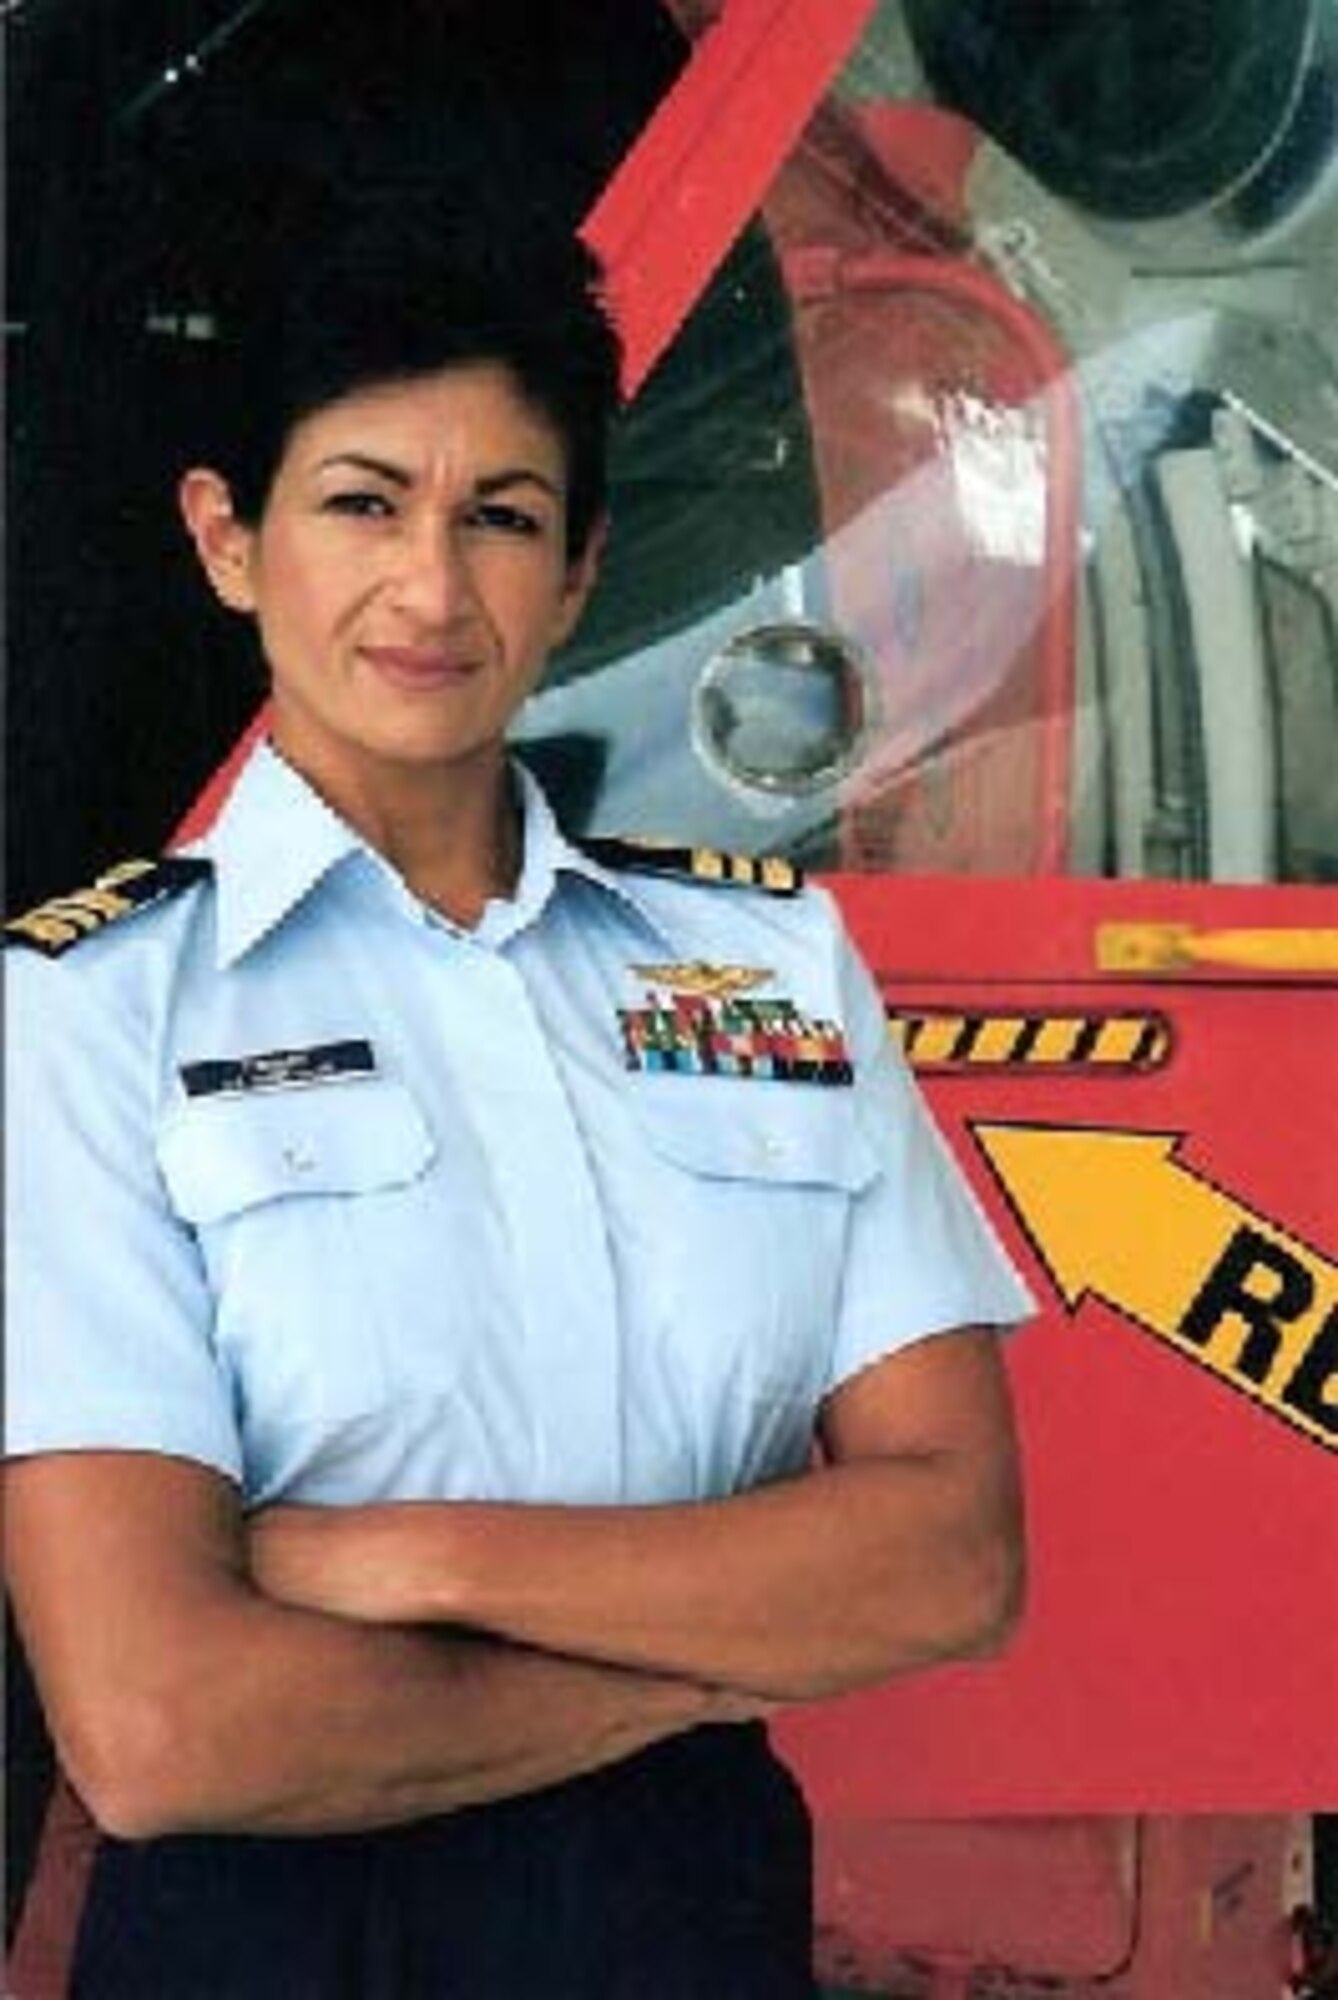 Marilyn Melendez Dykman – In 1991, Dykman transferred from the U.S. Army to become the first Hispanic-American female aviator in the U.S. Coast Guard. (Courtesy photo)